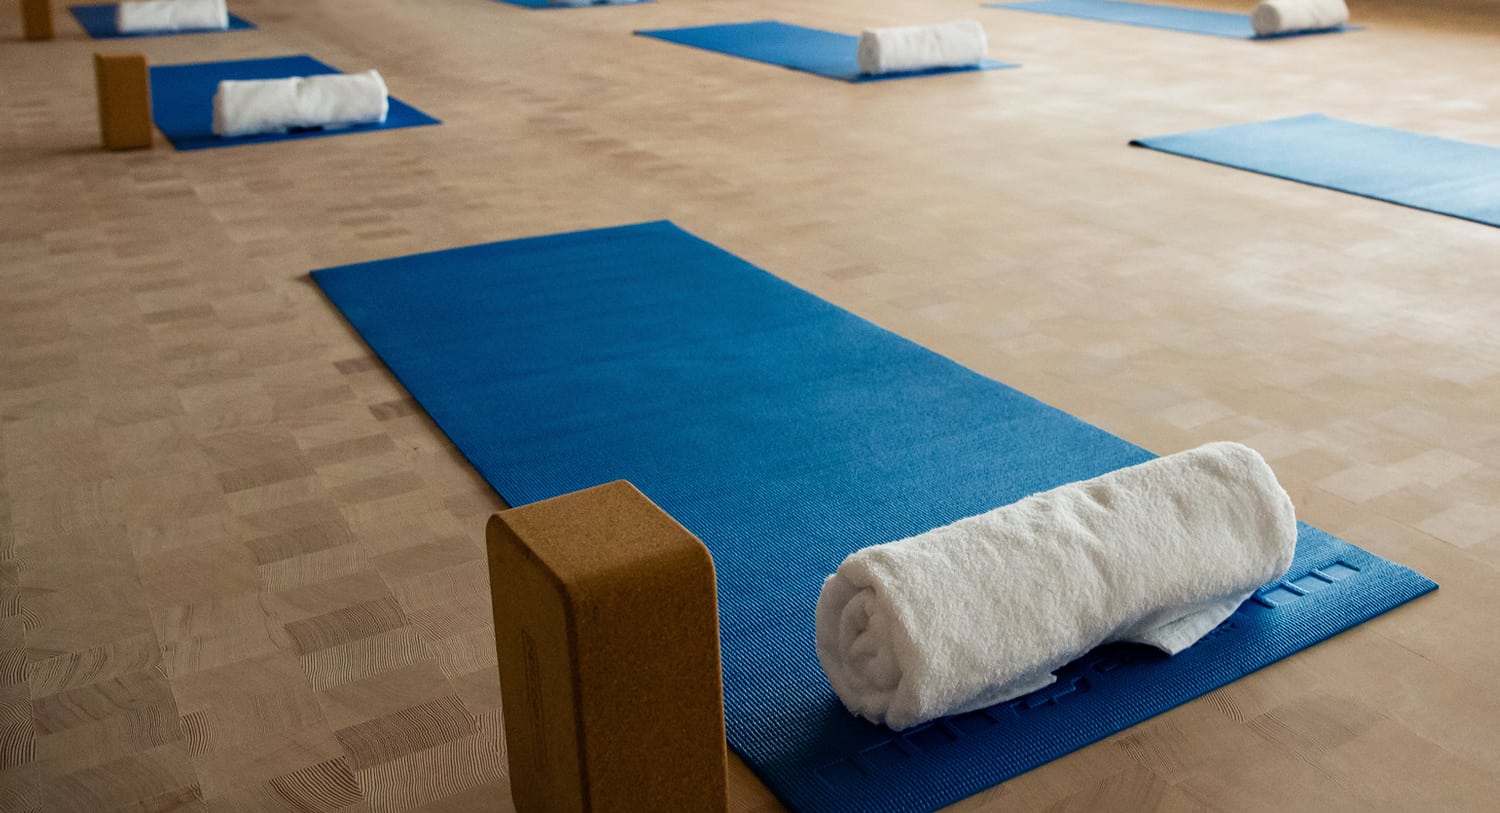 Yoga mats in Integrative Health and Wellbeing's multipurpose room